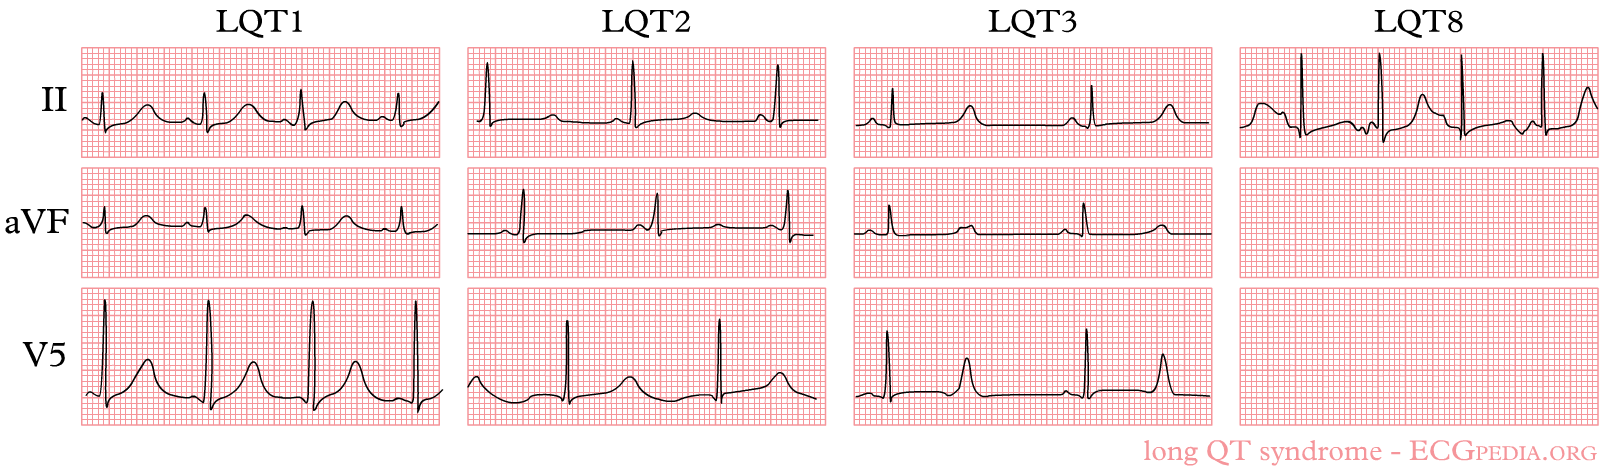 The three most common forms of LQTS can be recognized by the characteristic ECG abnormalities